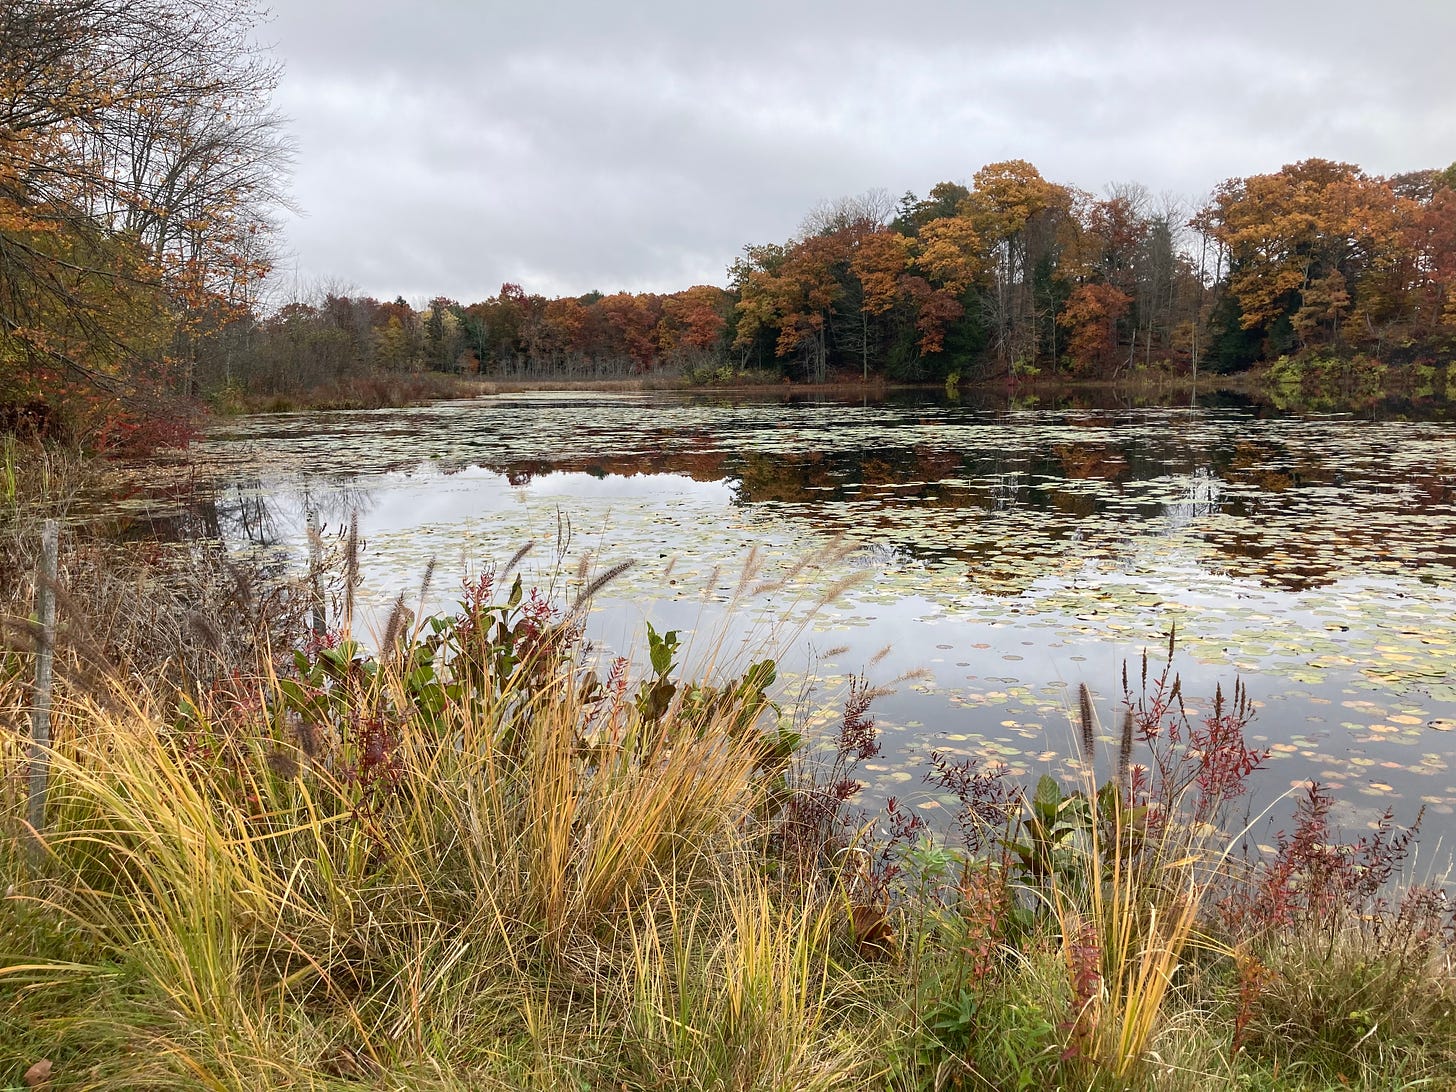 A pond covered in lily pads and surrounded by vegetation in autumn colors.